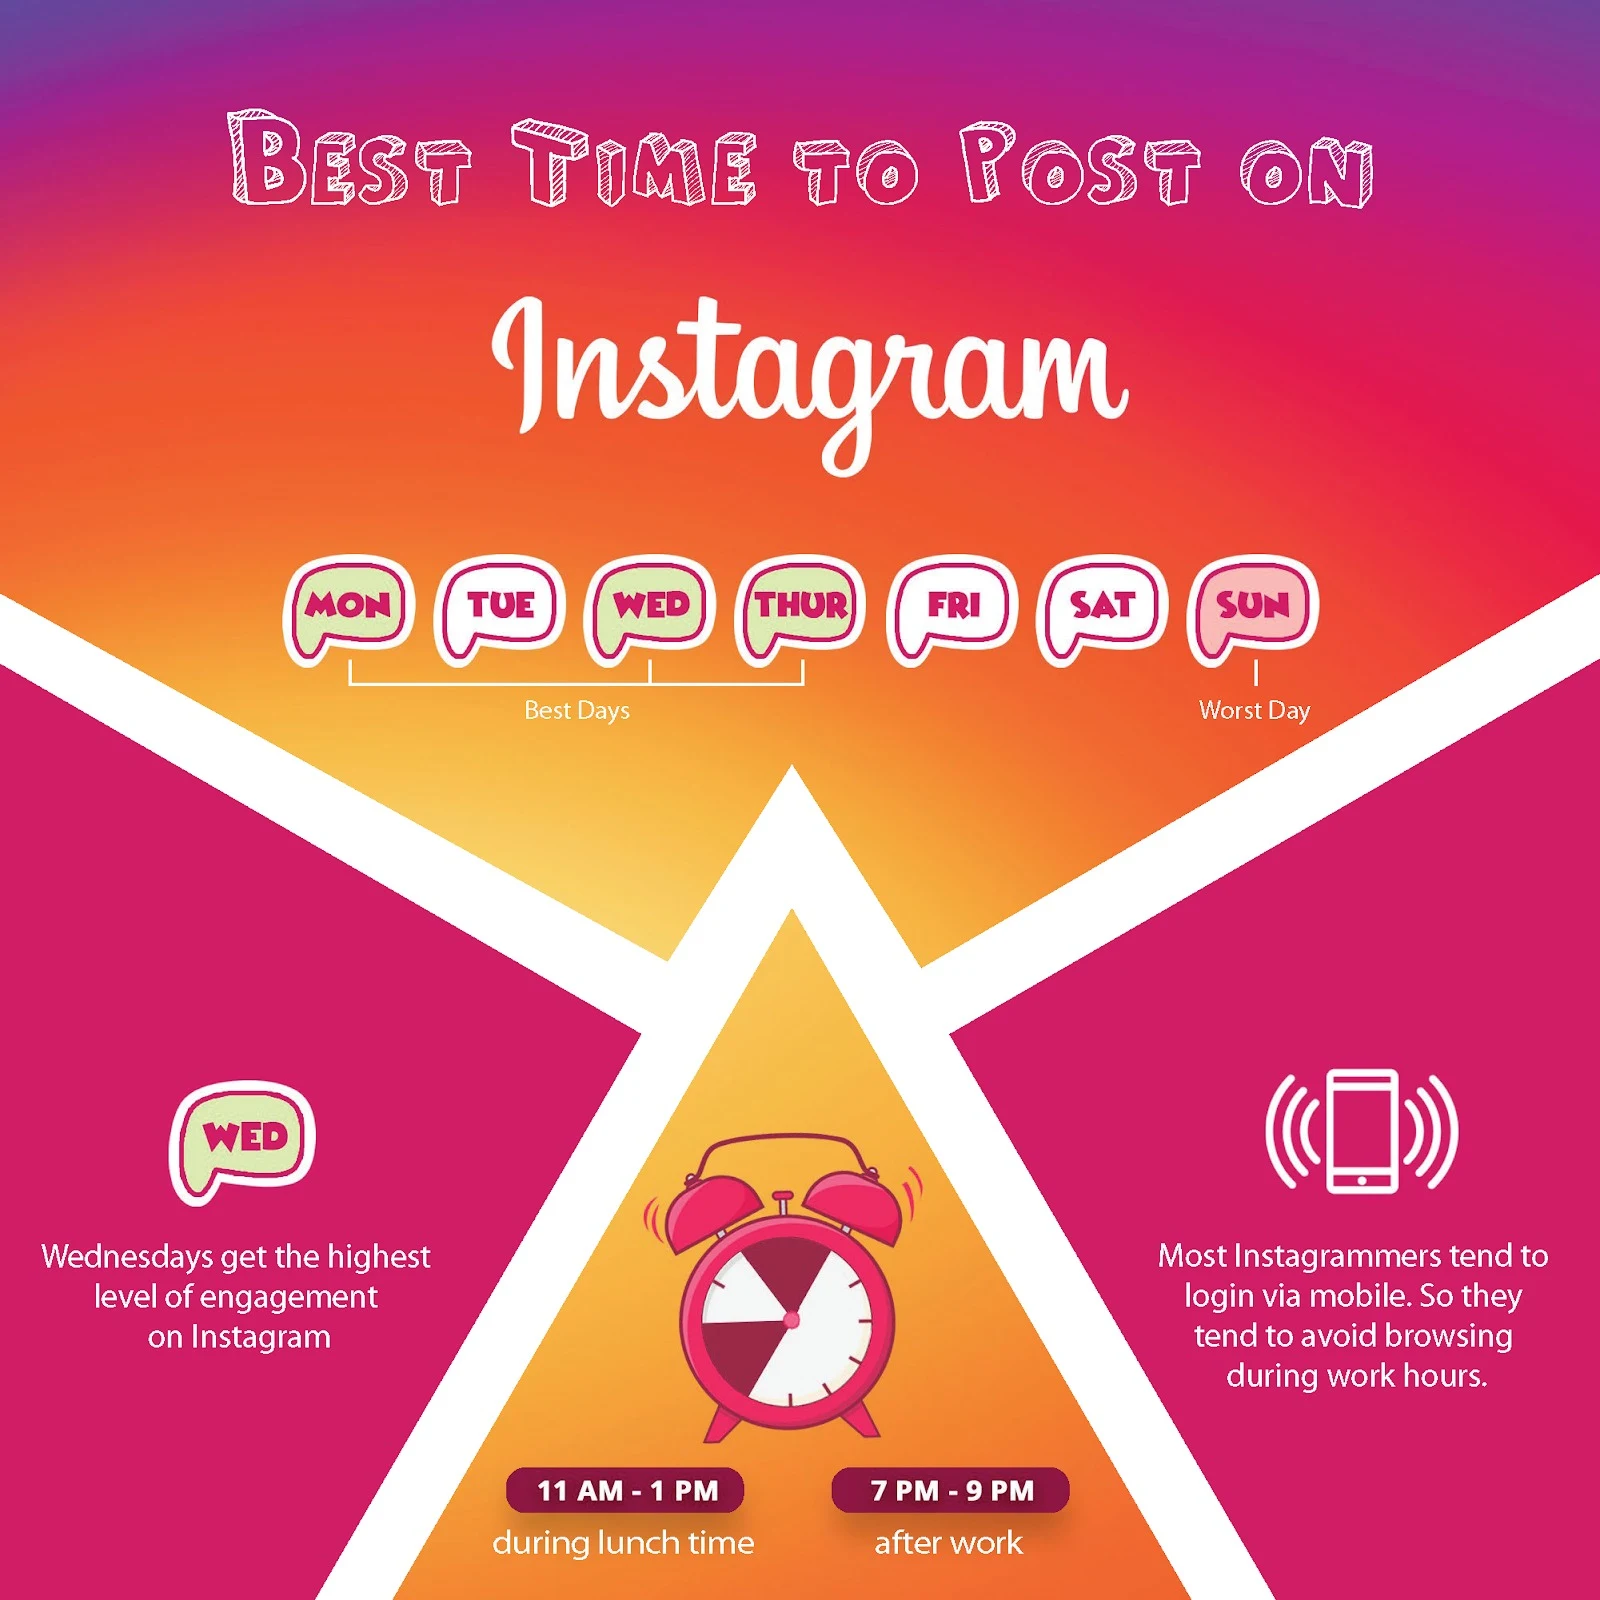 When to post on Instagram